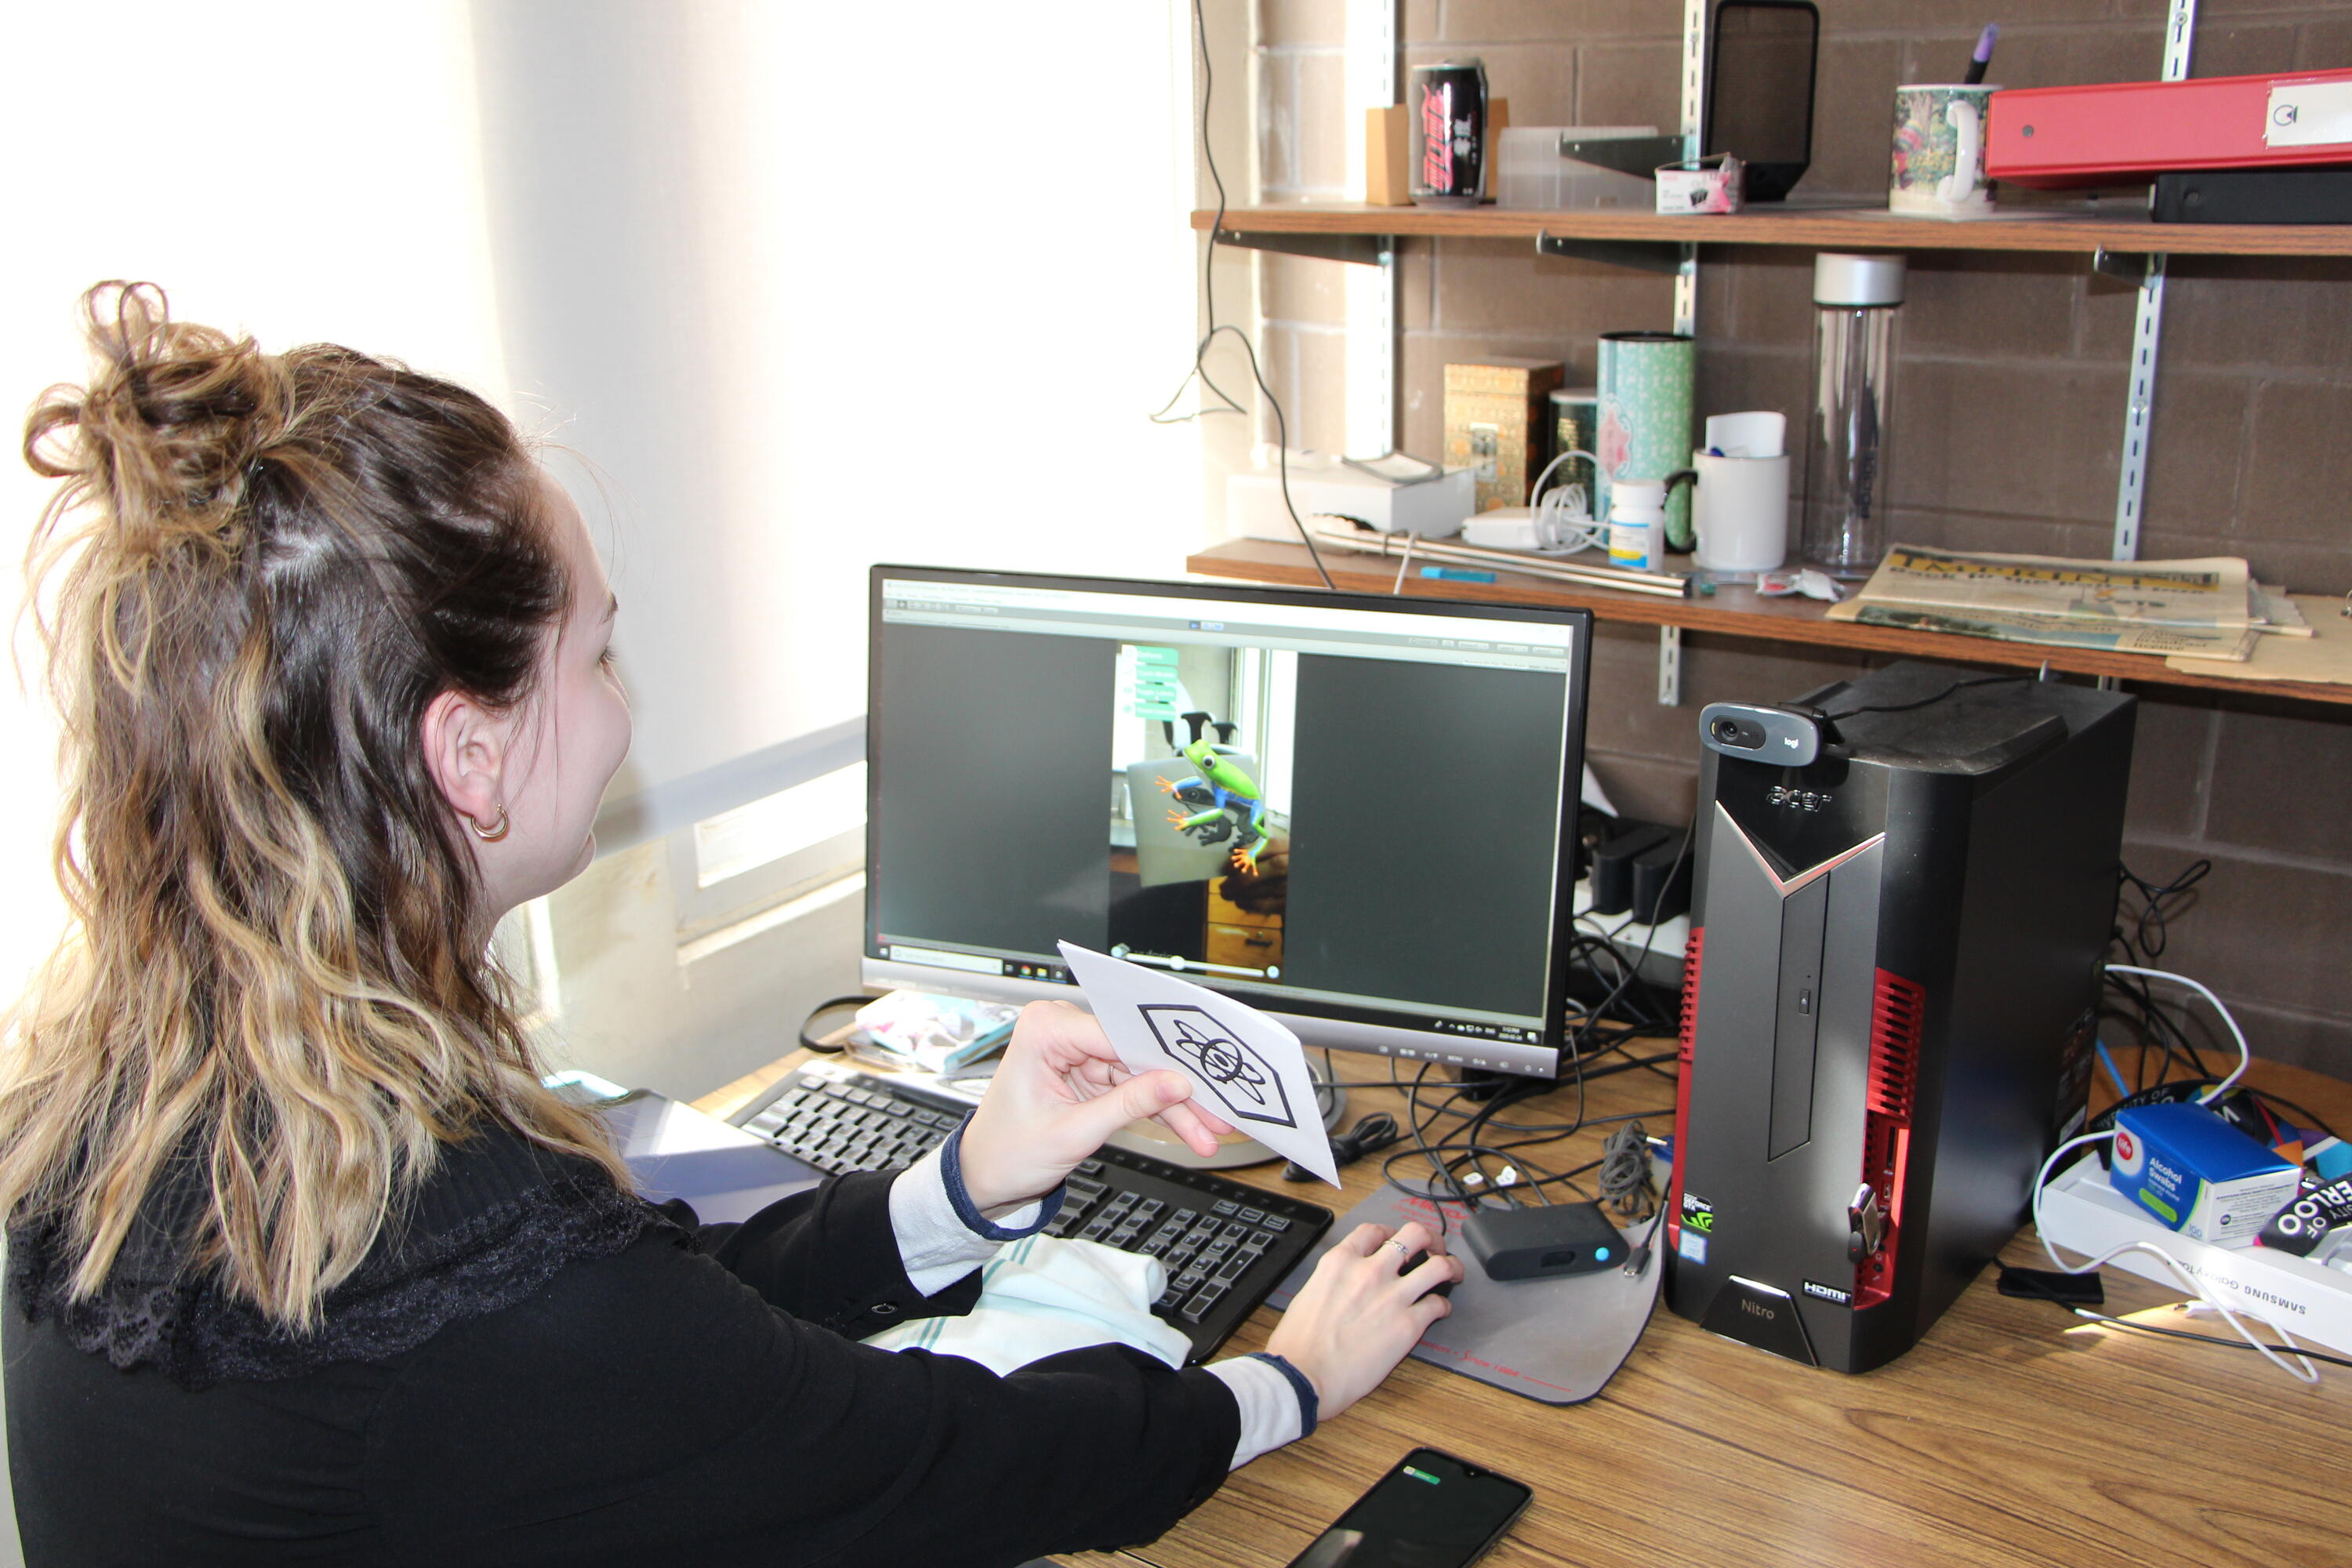 A student looking at a frog artificial reality image on a computer